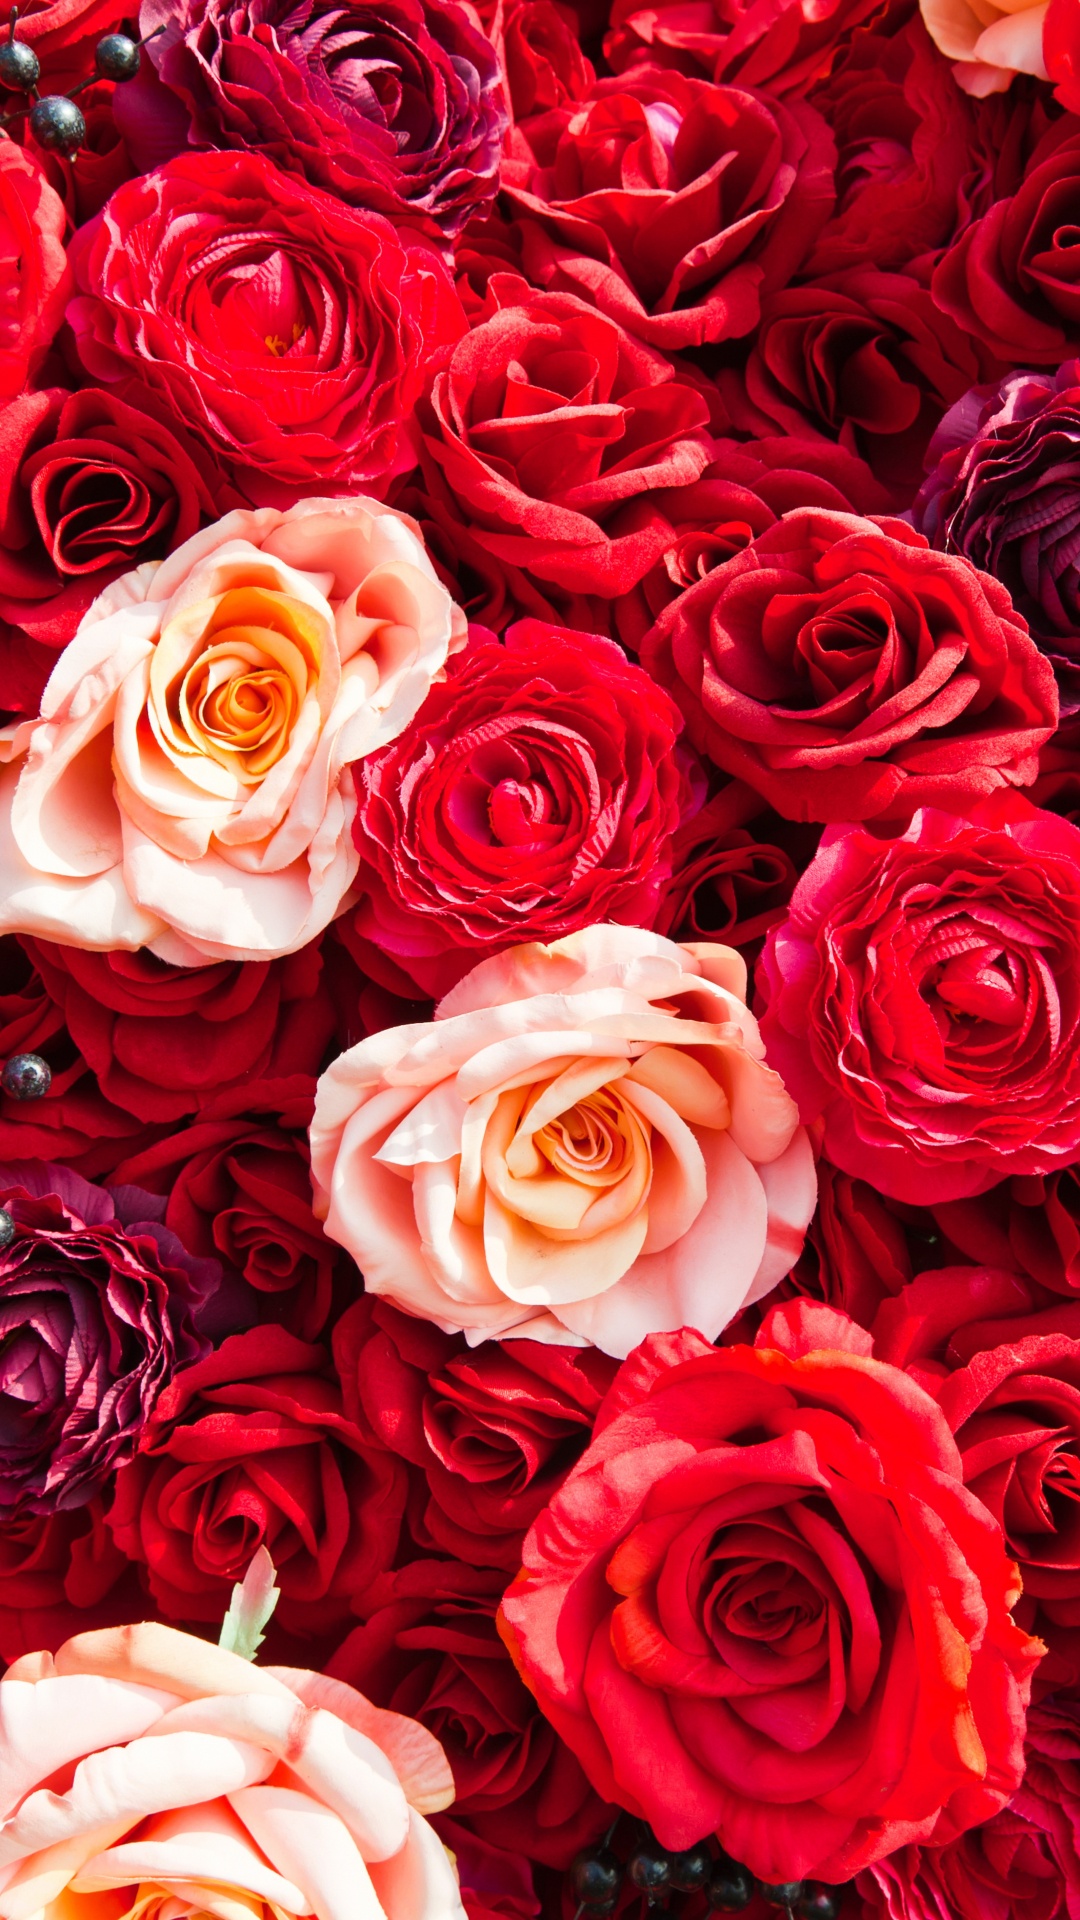 Red and White Roses Bouquet. Wallpaper in 1080x1920 Resolution